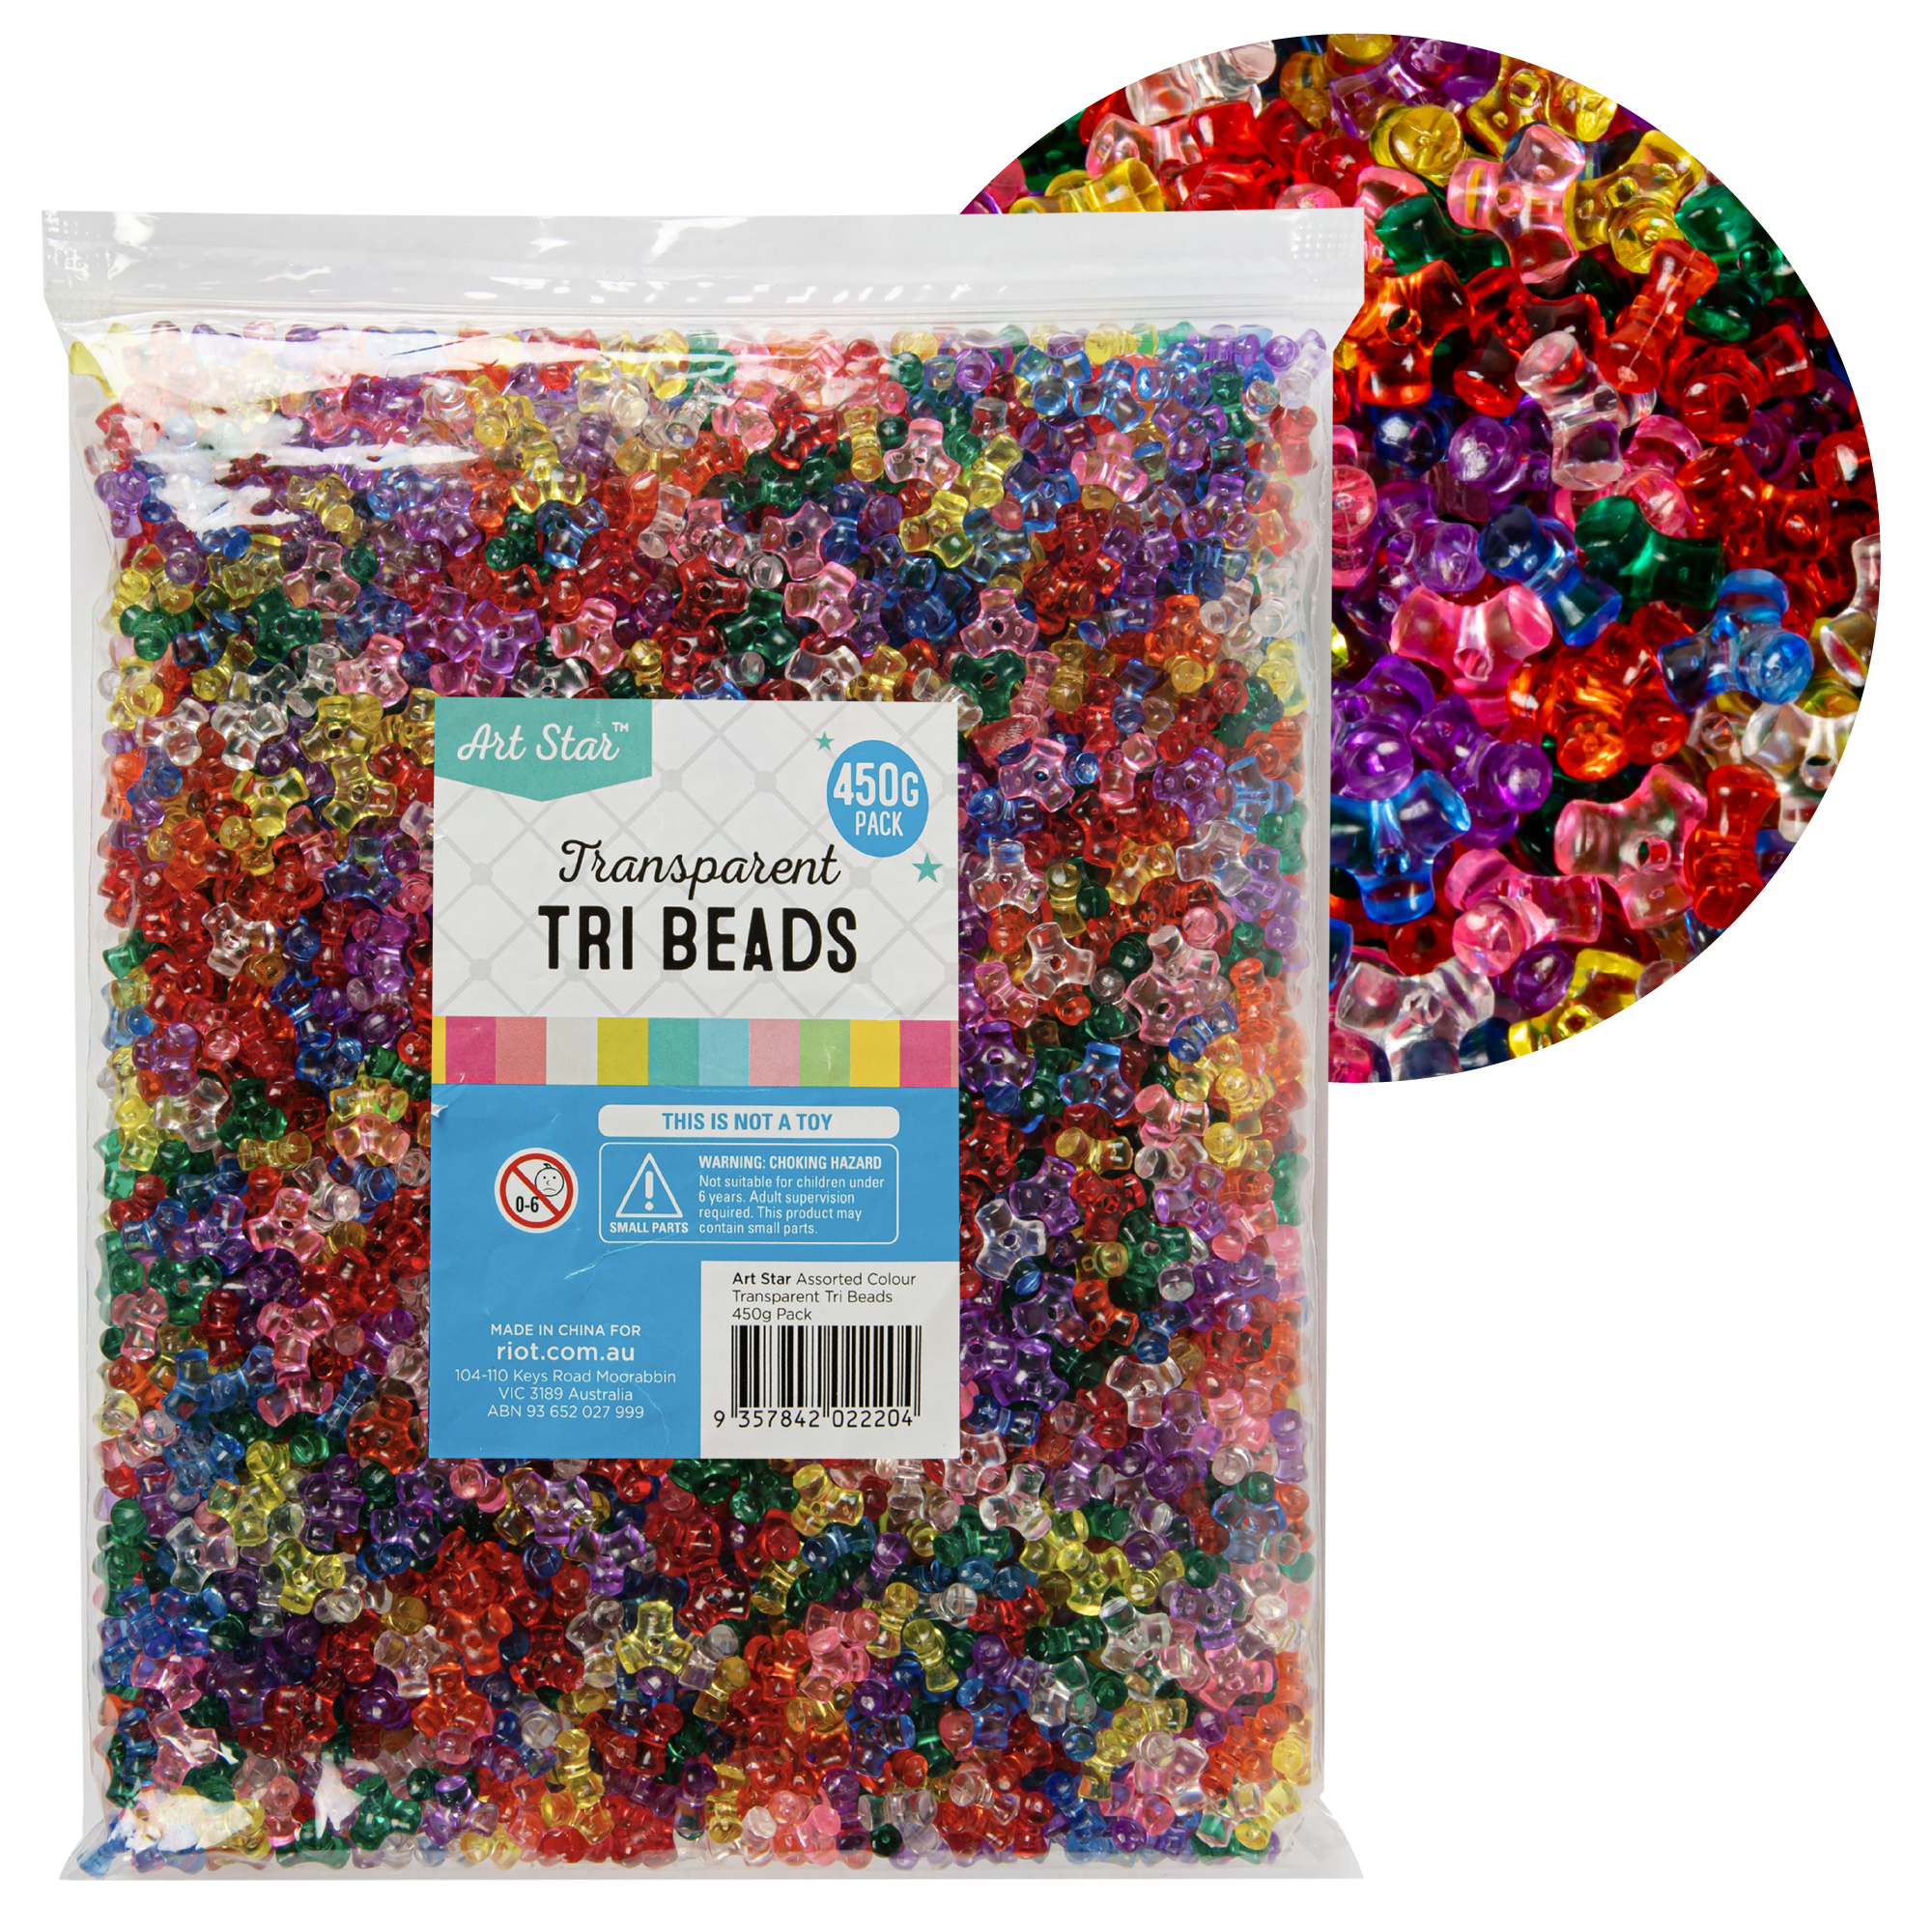 Image of Art Star Assorted Colour Transparent Tri Beads 11mm 450g Pack